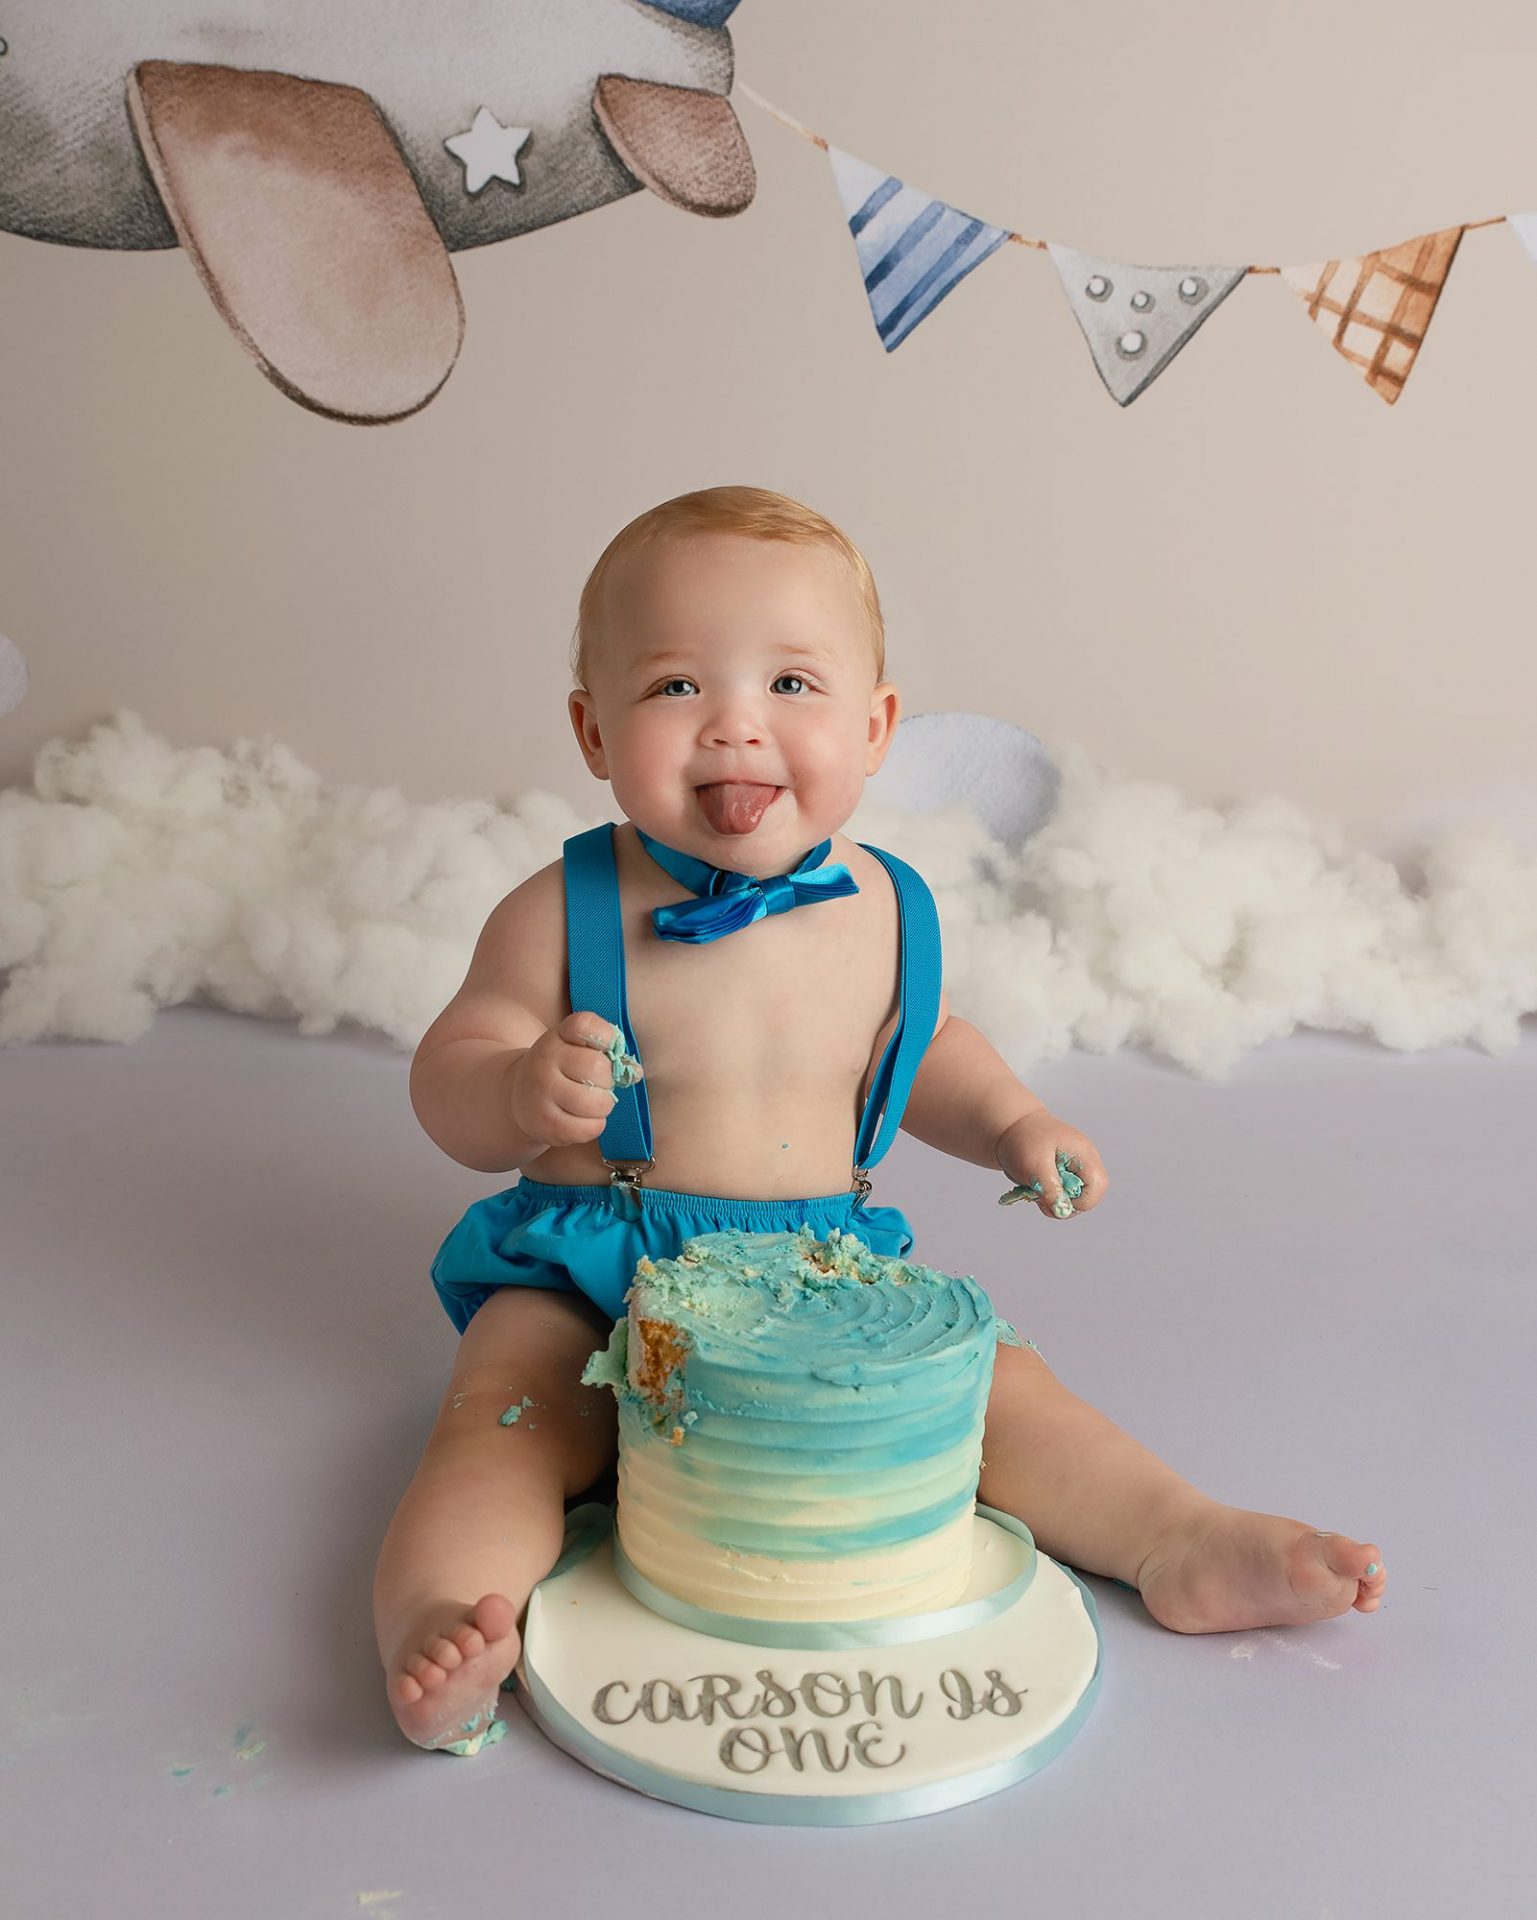 For the photography lover | Camera cakes, Custom cakes, Cake